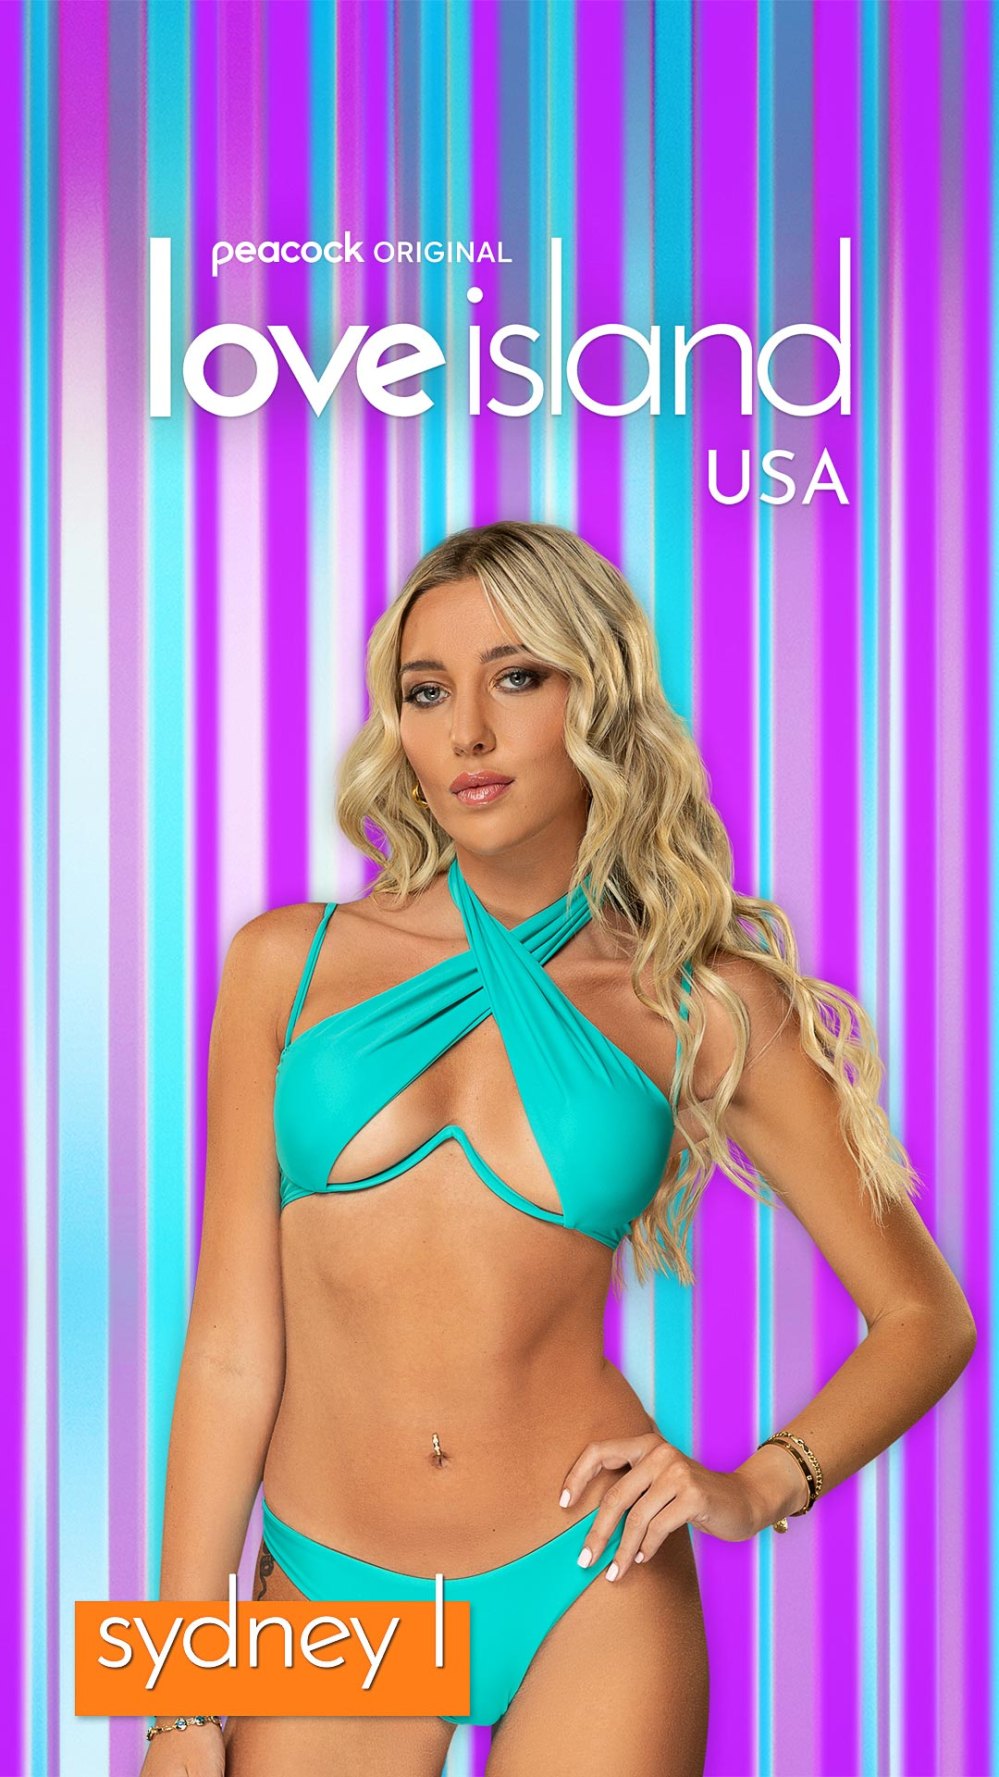 Discover the New Shell Bombs on Love Island USA Season 6 Coming to Casa Amor LoveIsland_S6_SYDNEY L_CharacterPortrait_1080x1920_Text 125